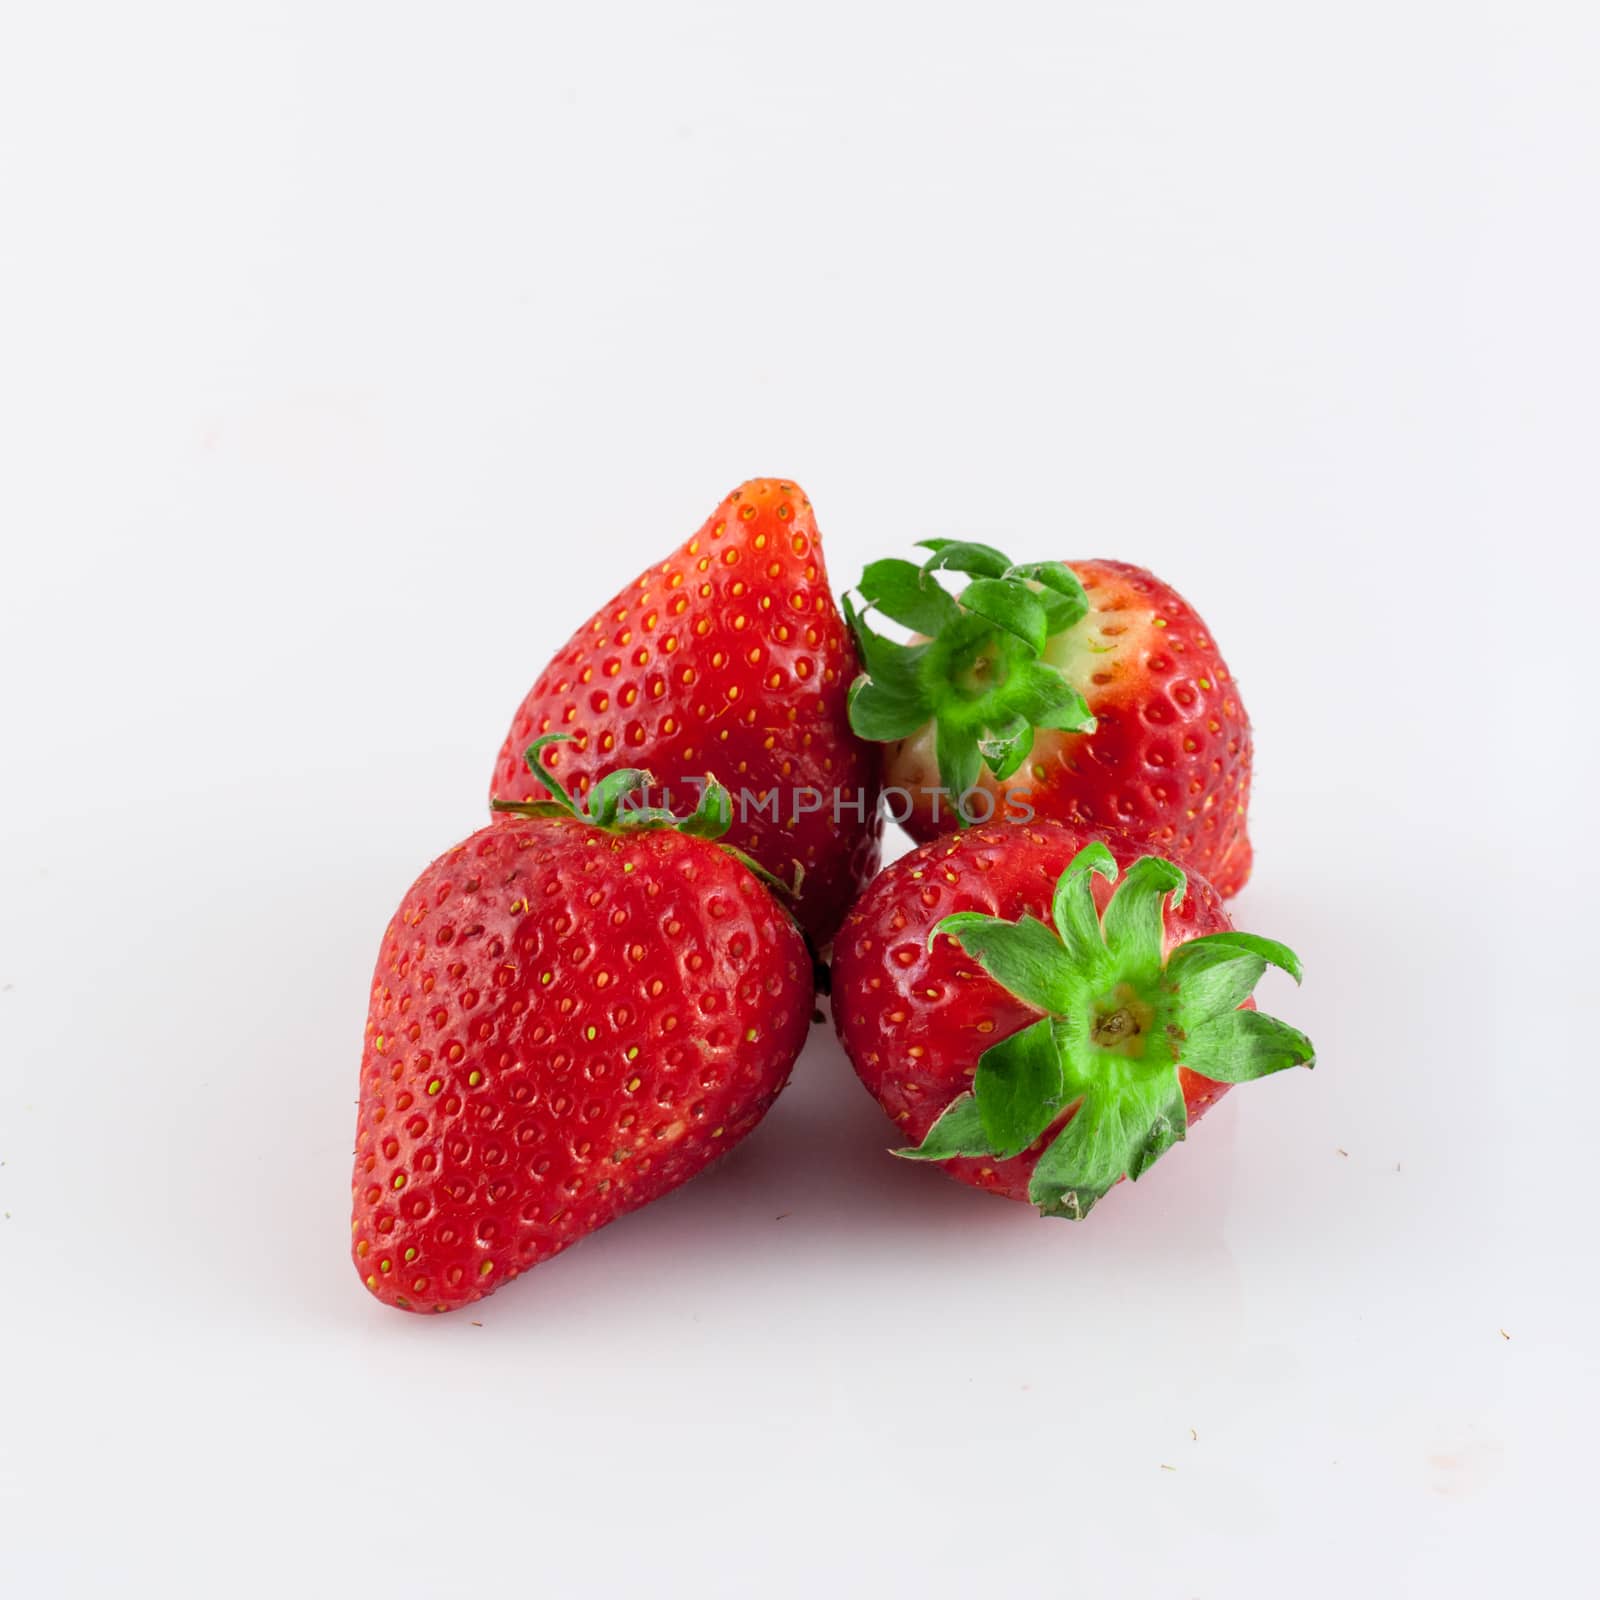 Closeup of strawberries on white background